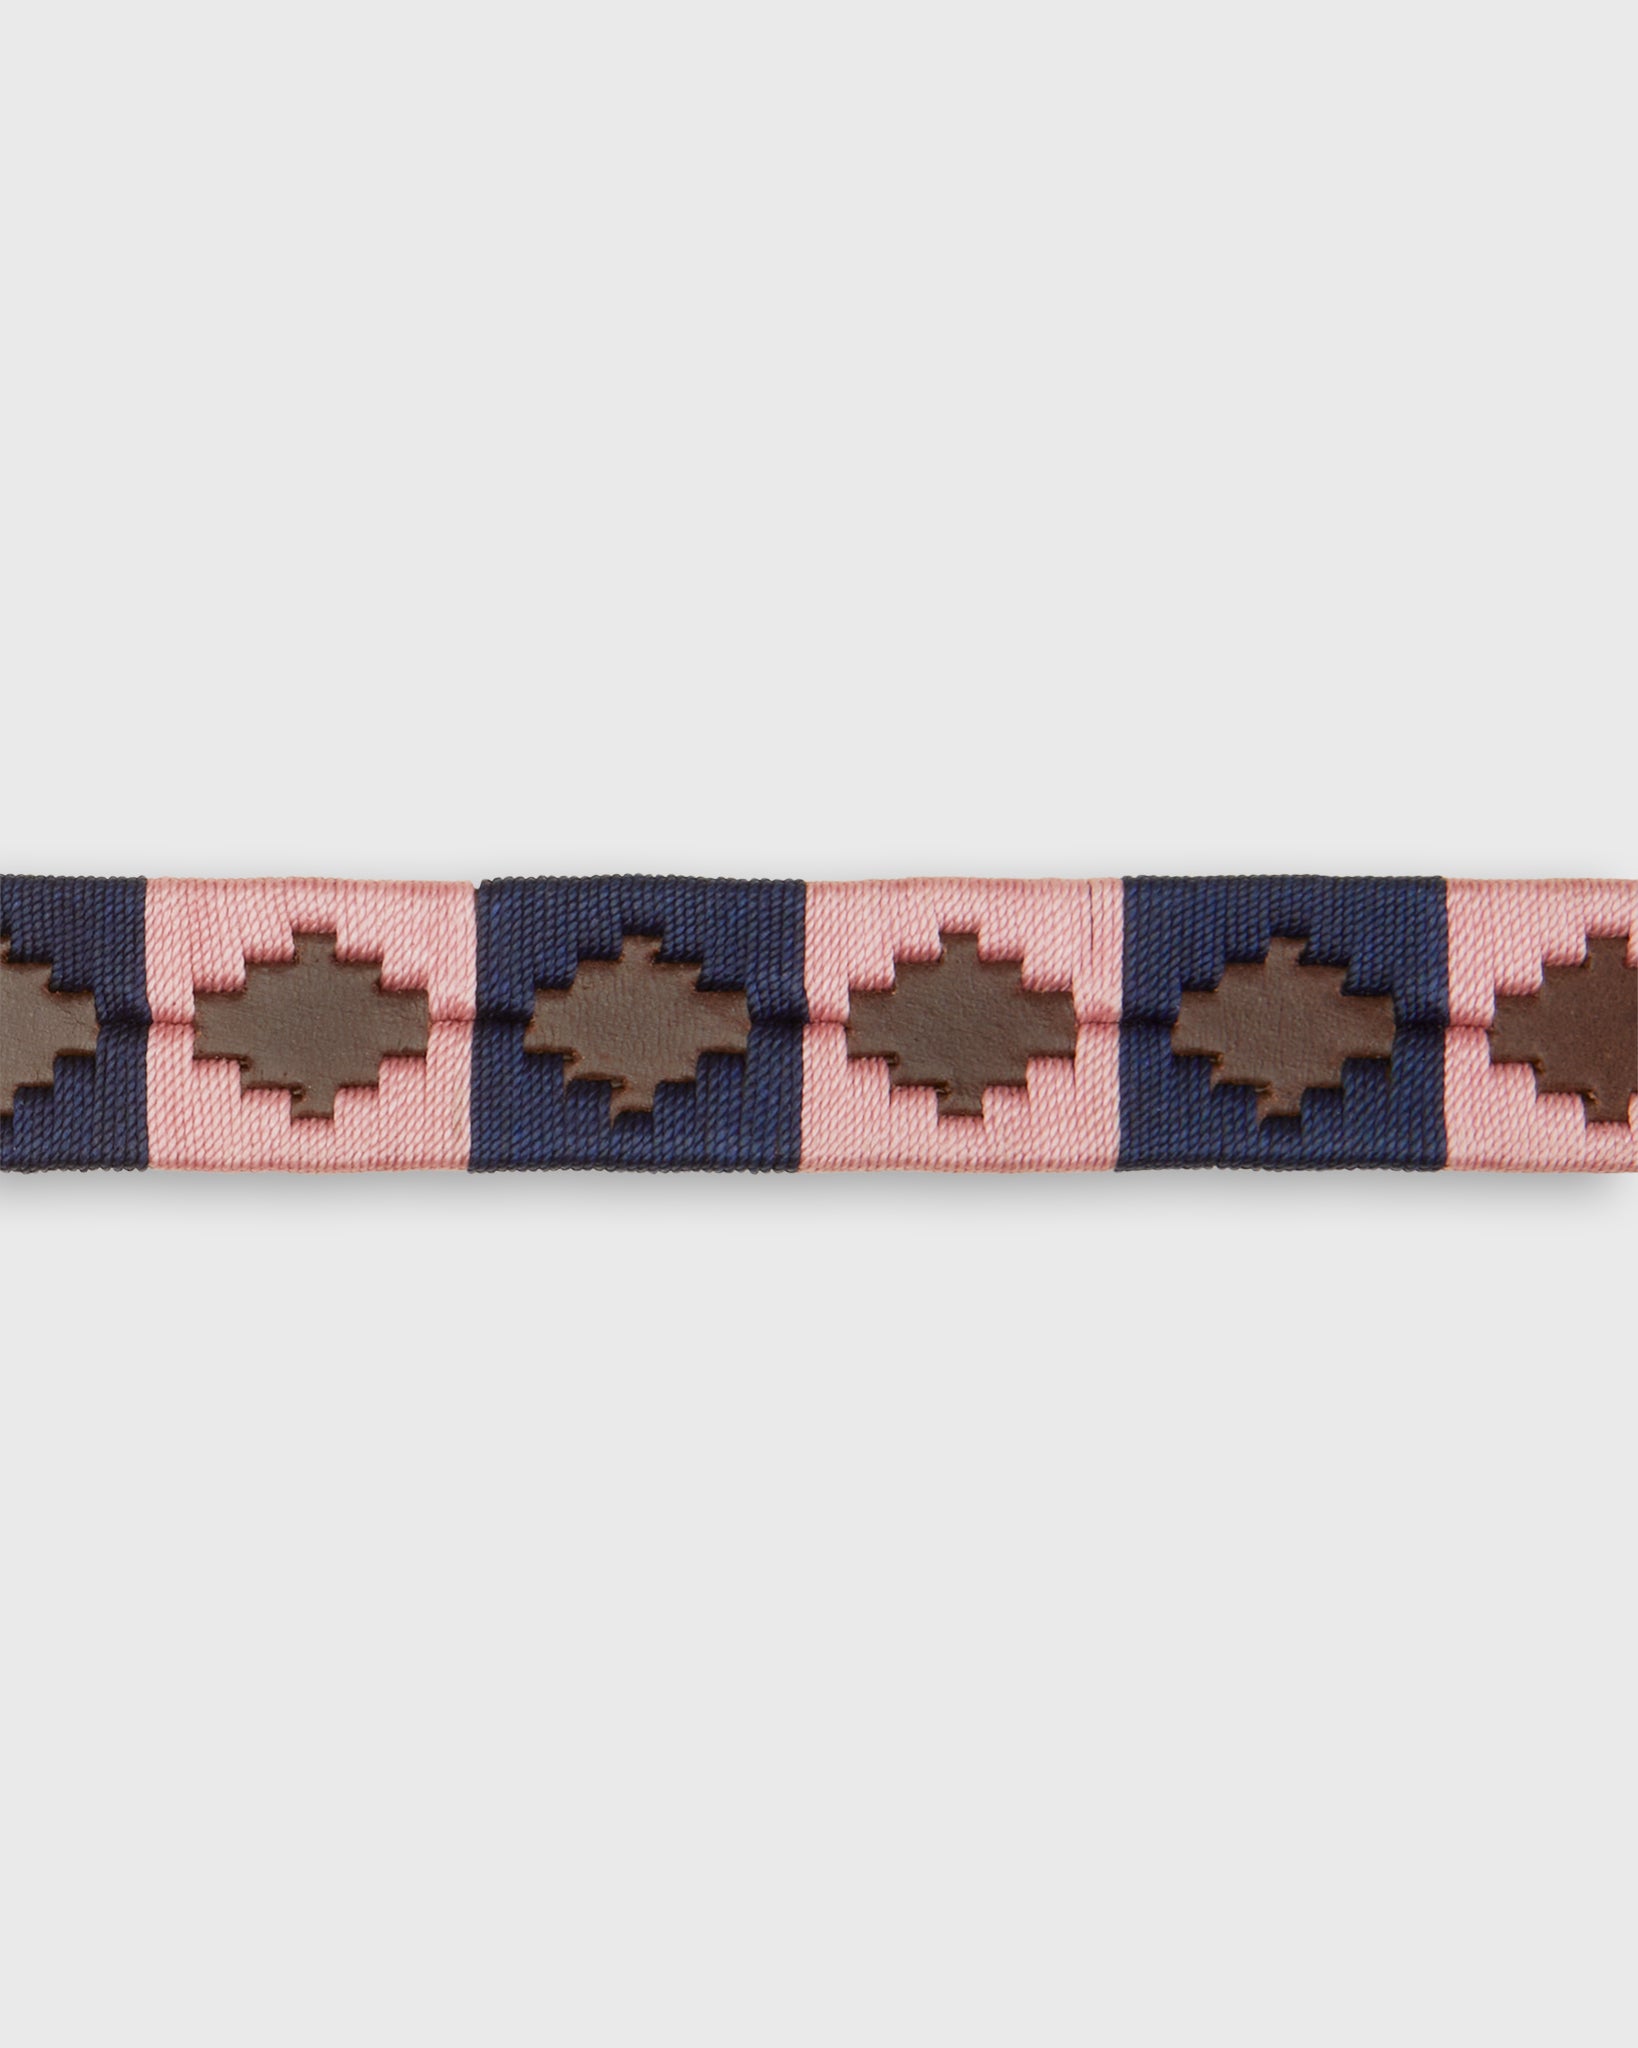 1 1/8" Polo Belt in Pink/Navy Chocolate Leather